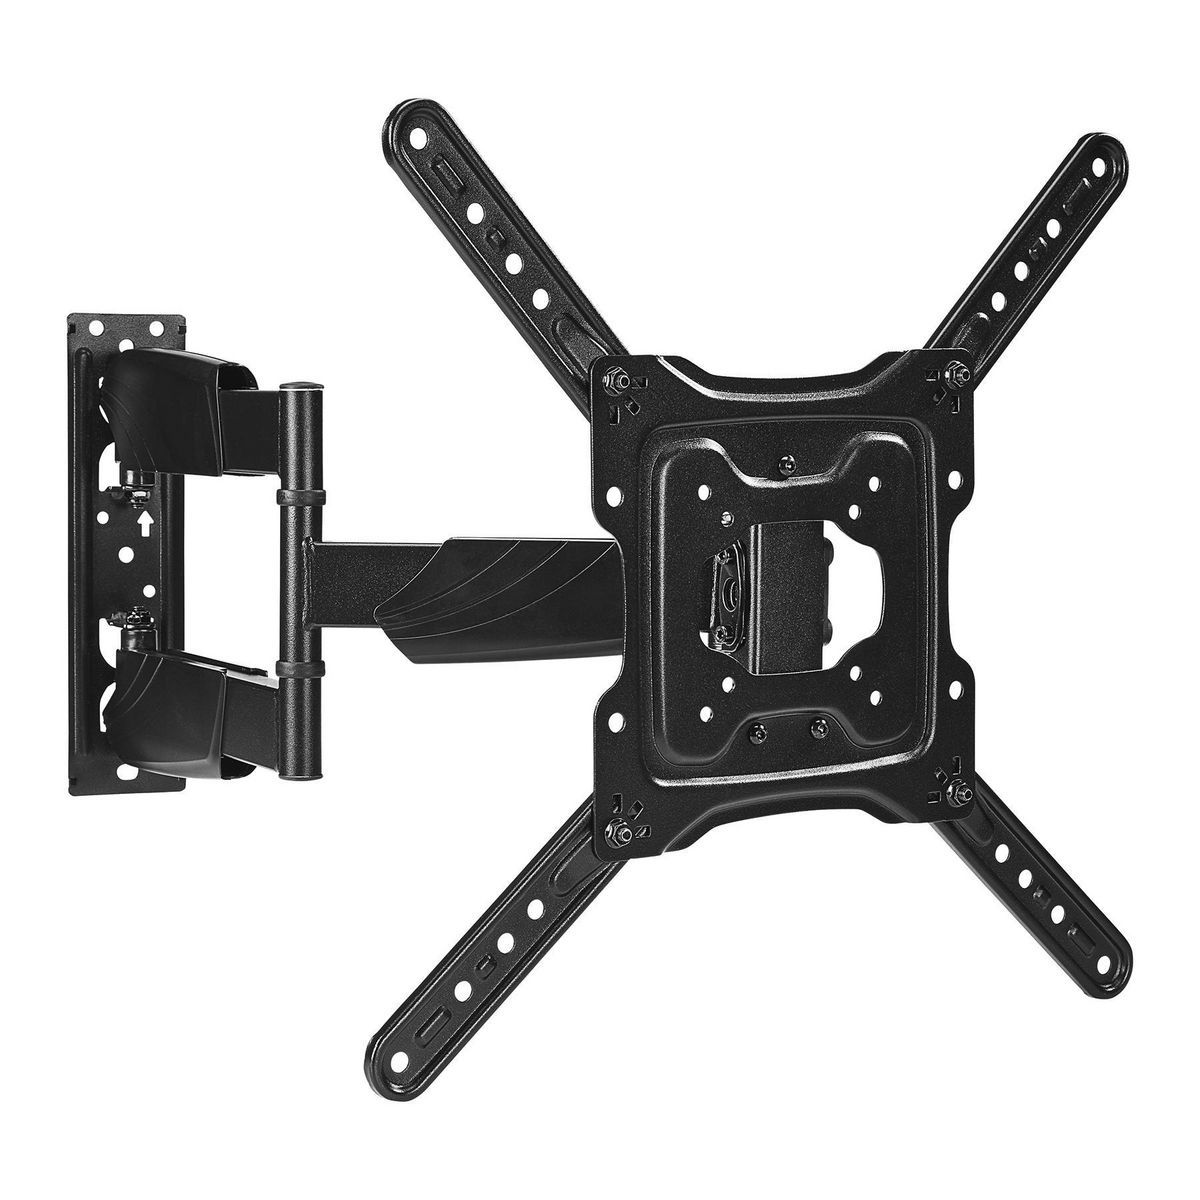 23 in. to 65 in. Single-Stud Full-Motion TV Mount